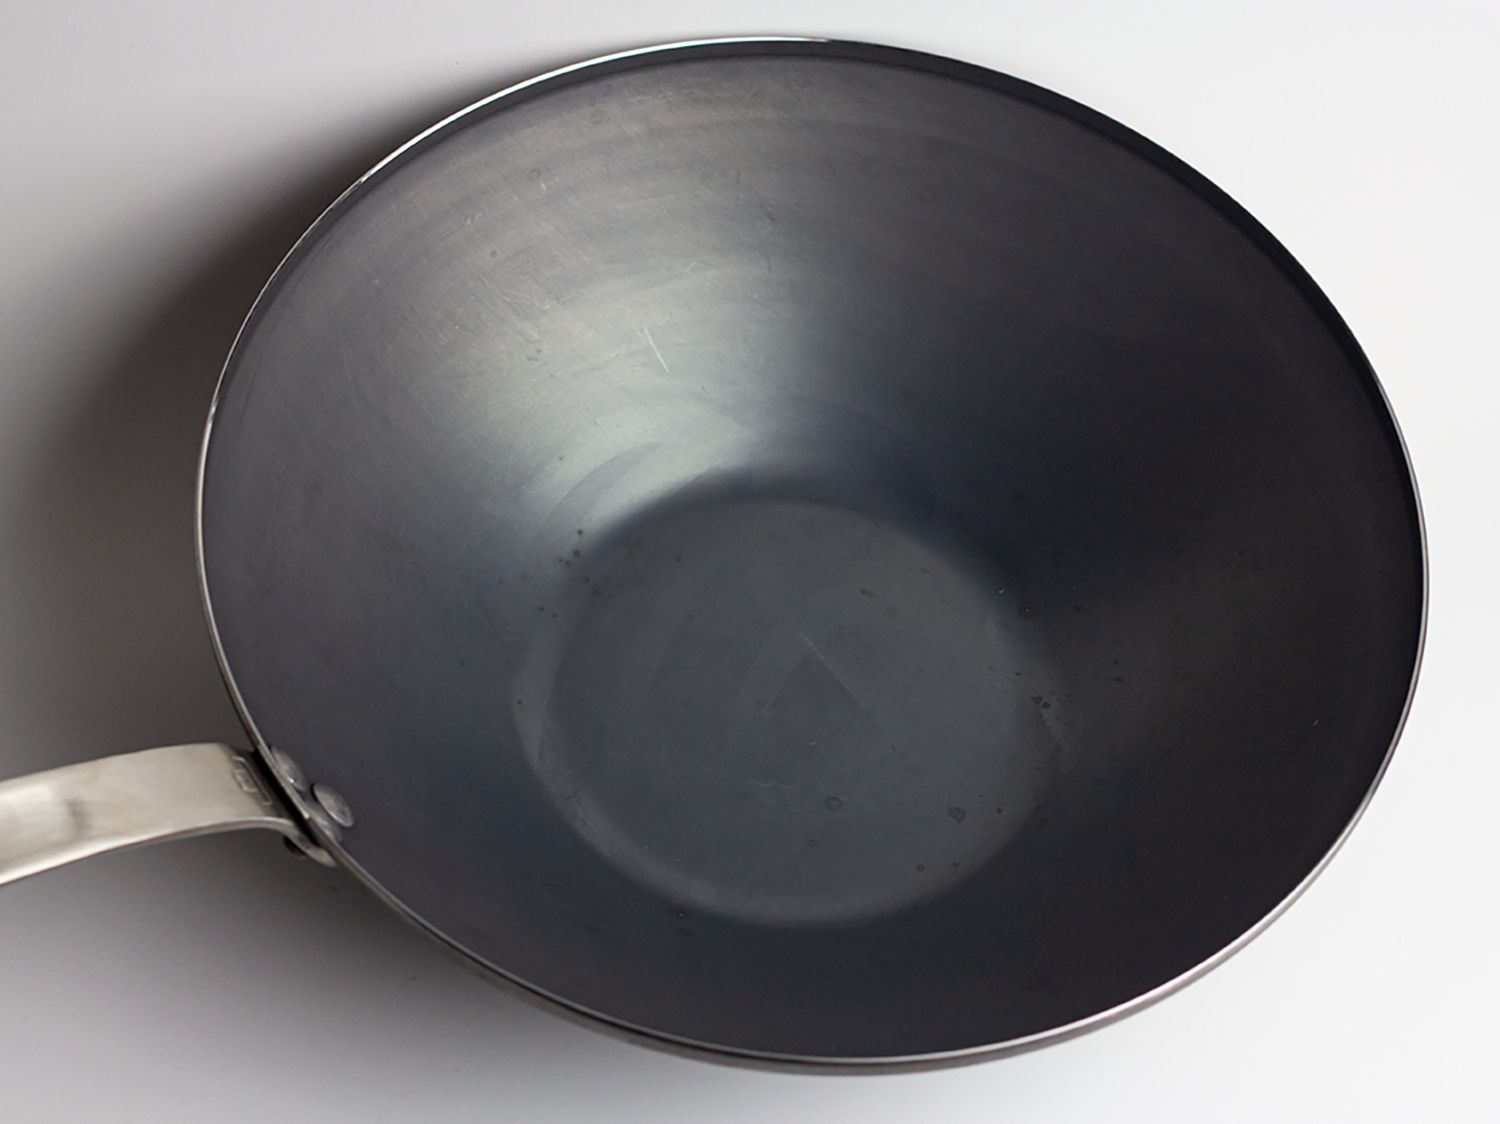 A blue carbon steel wok from Made In.